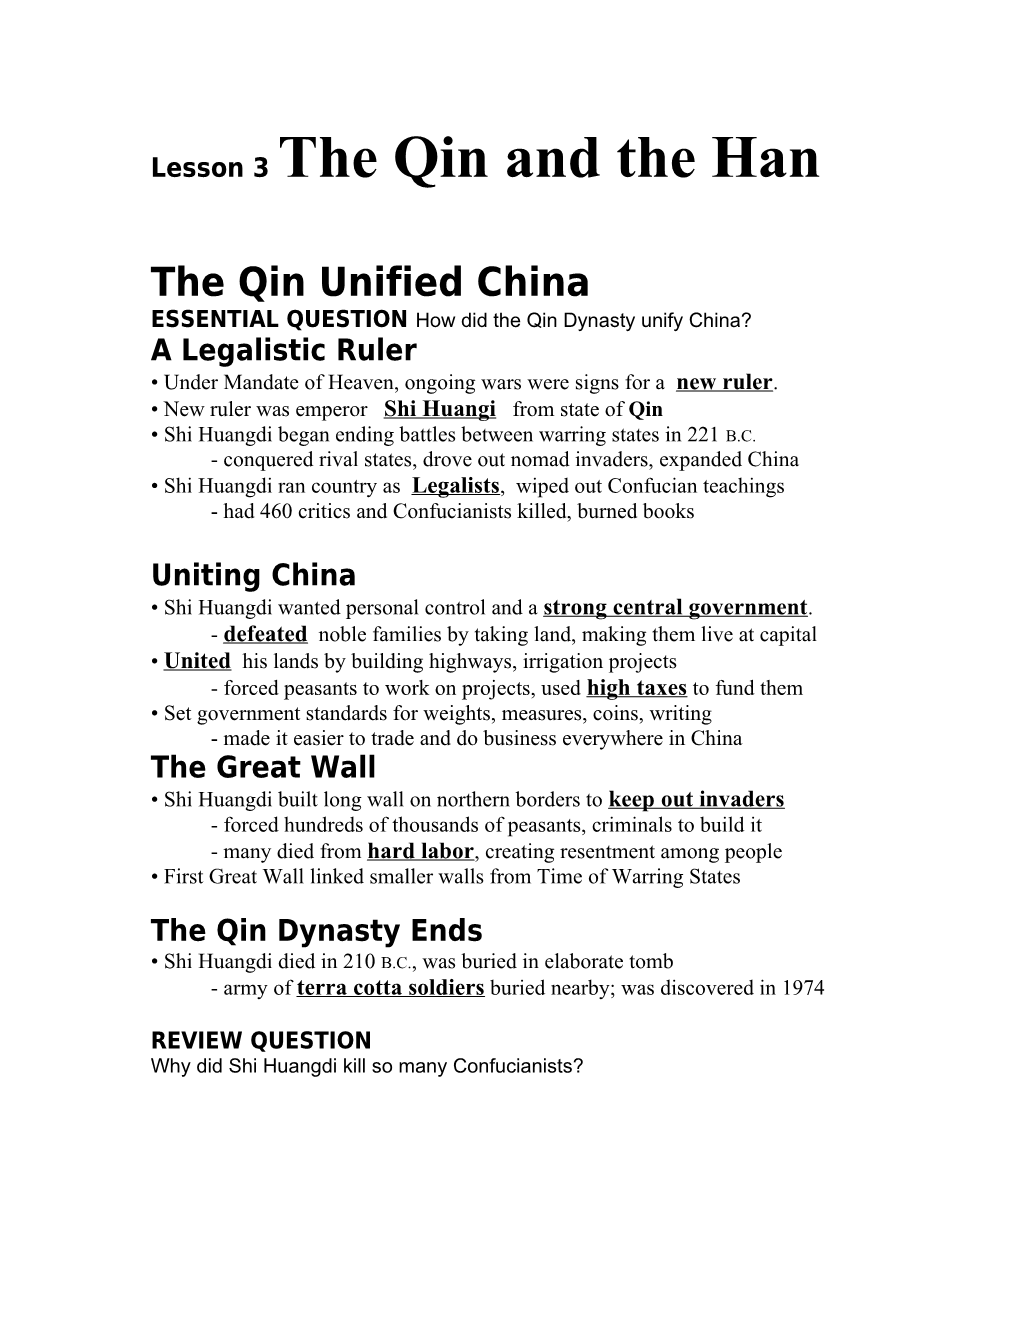 Lesson 3 the Qin and the Han